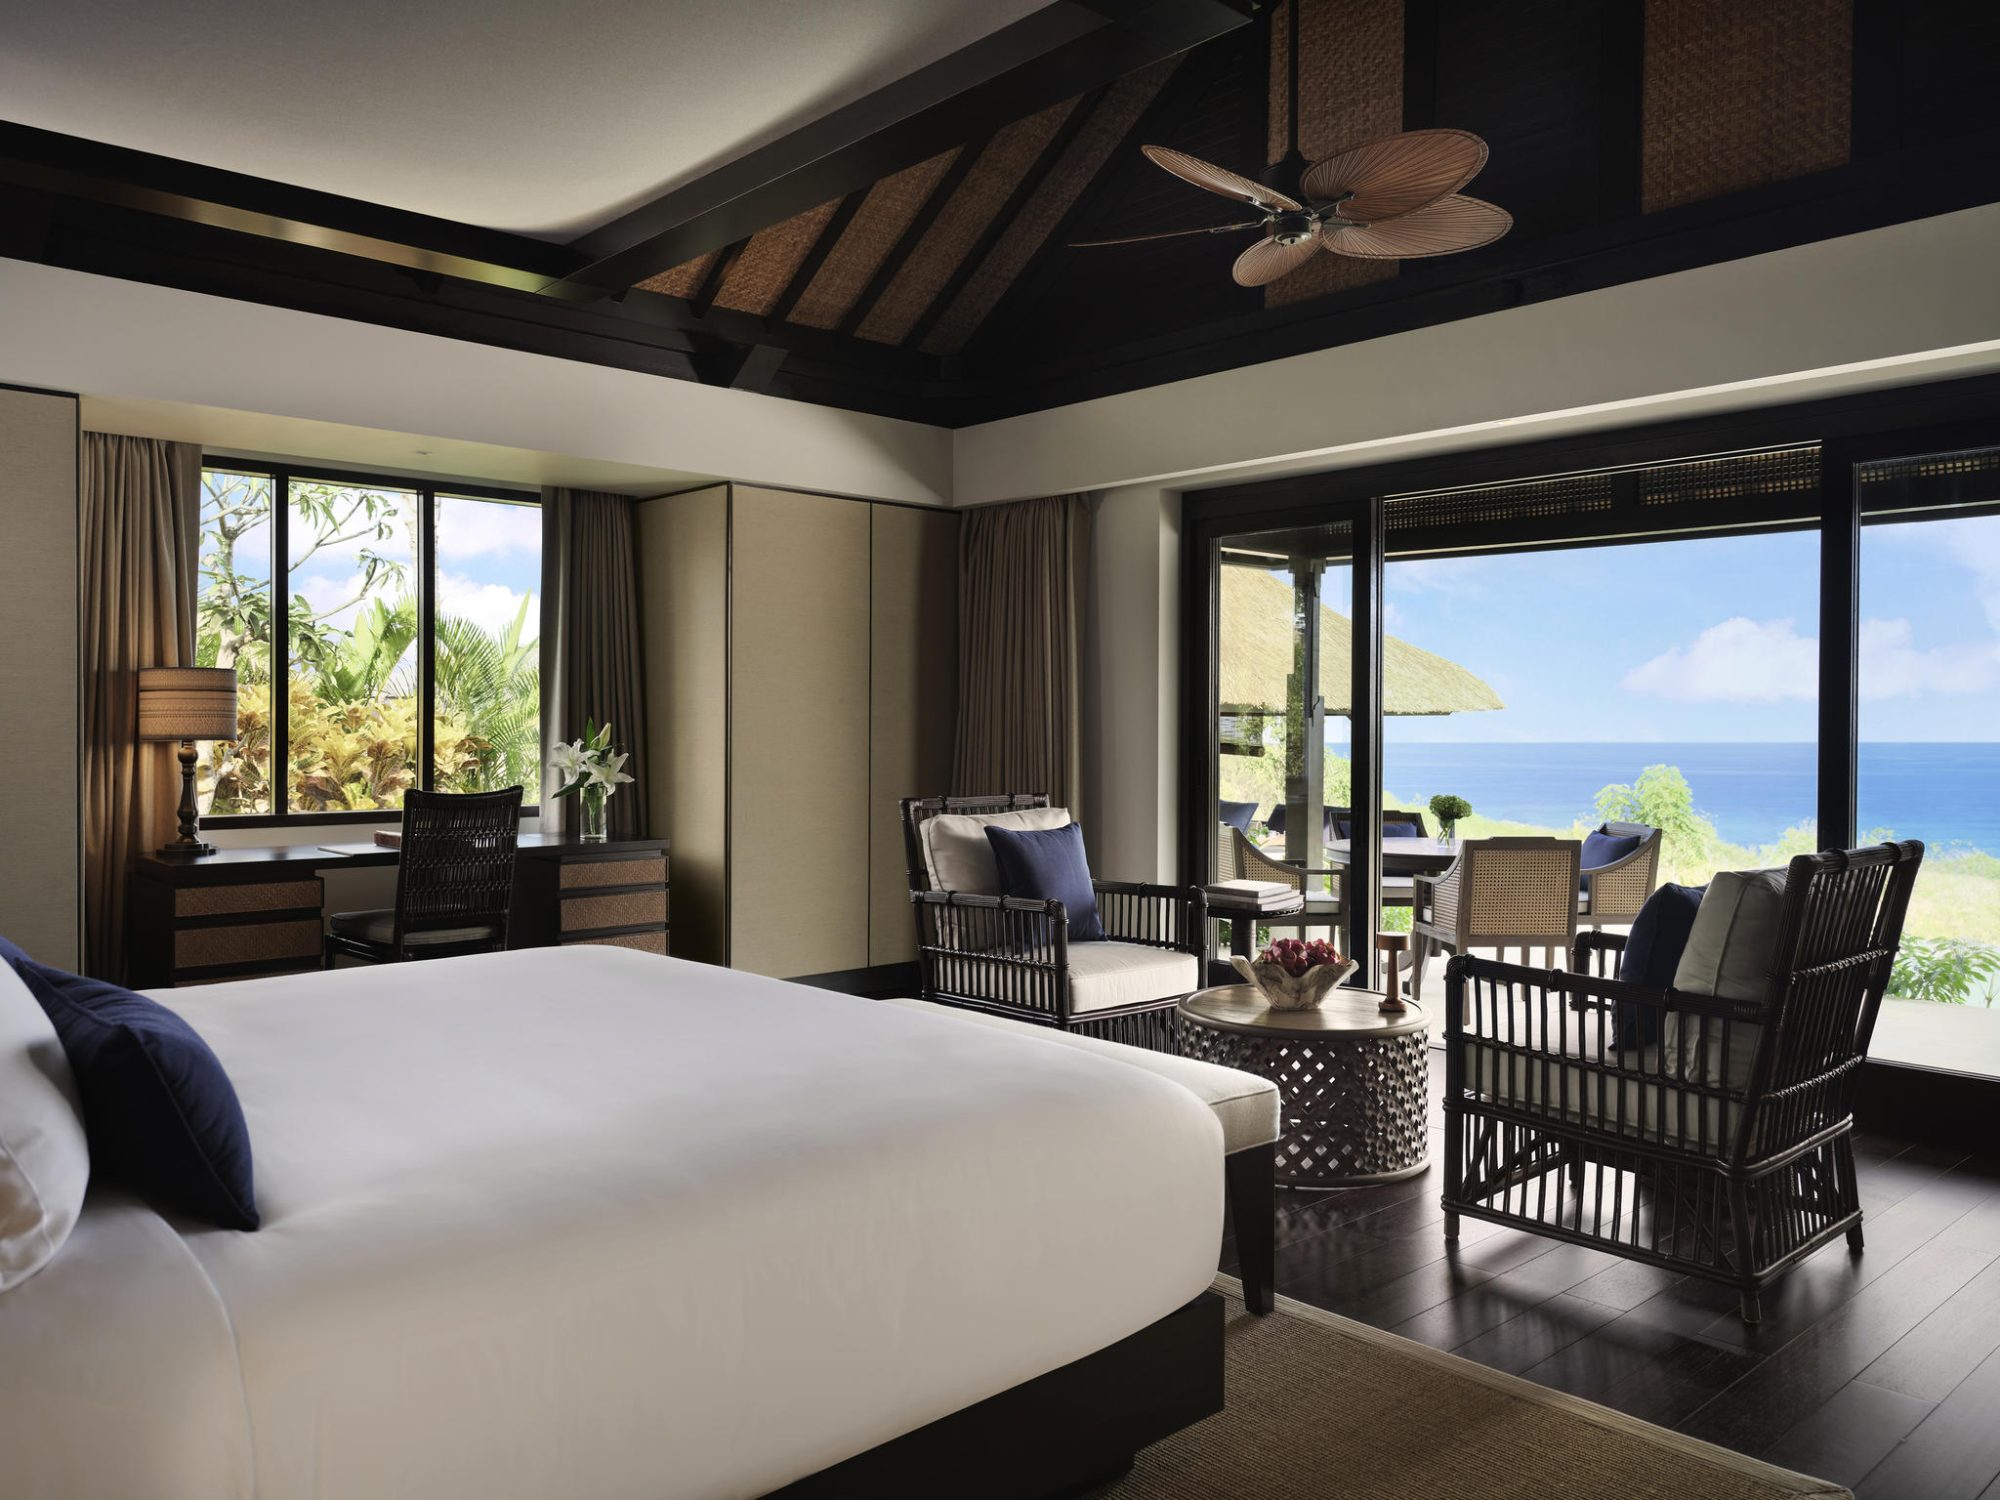 Raffles Bali is the epitome of secluded luxury in Jimbaran’s lush hills